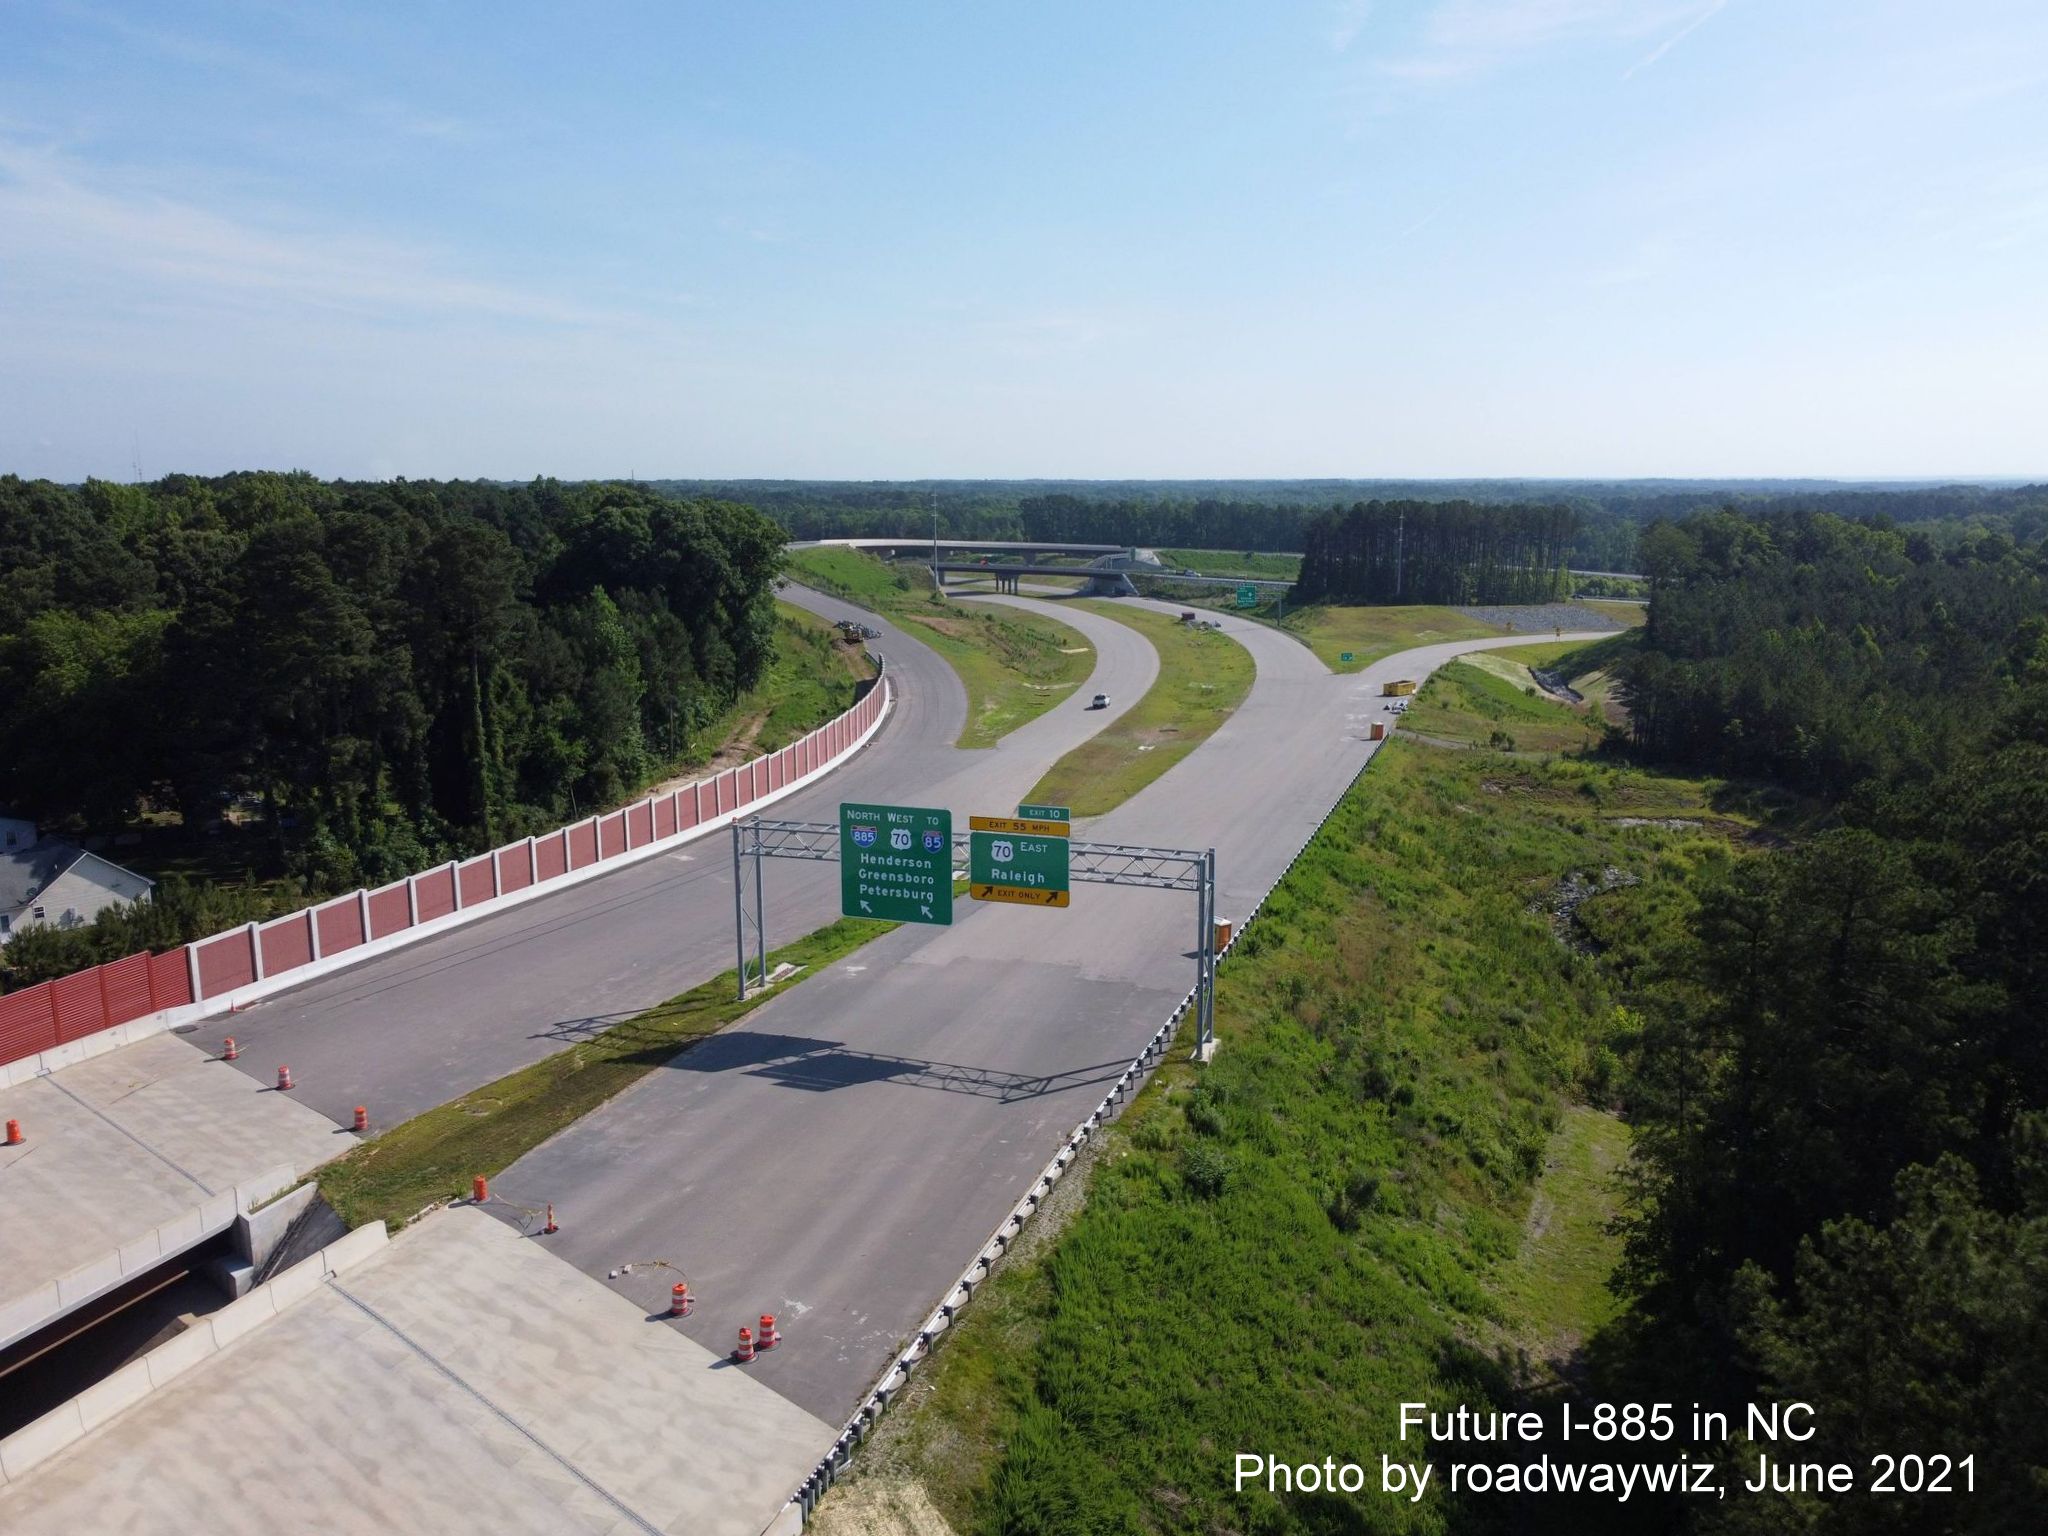 Image taken looking closely at the unopened I-885/East End Connector US 70 interchange in Durham, by roadwaywiz, June 2021